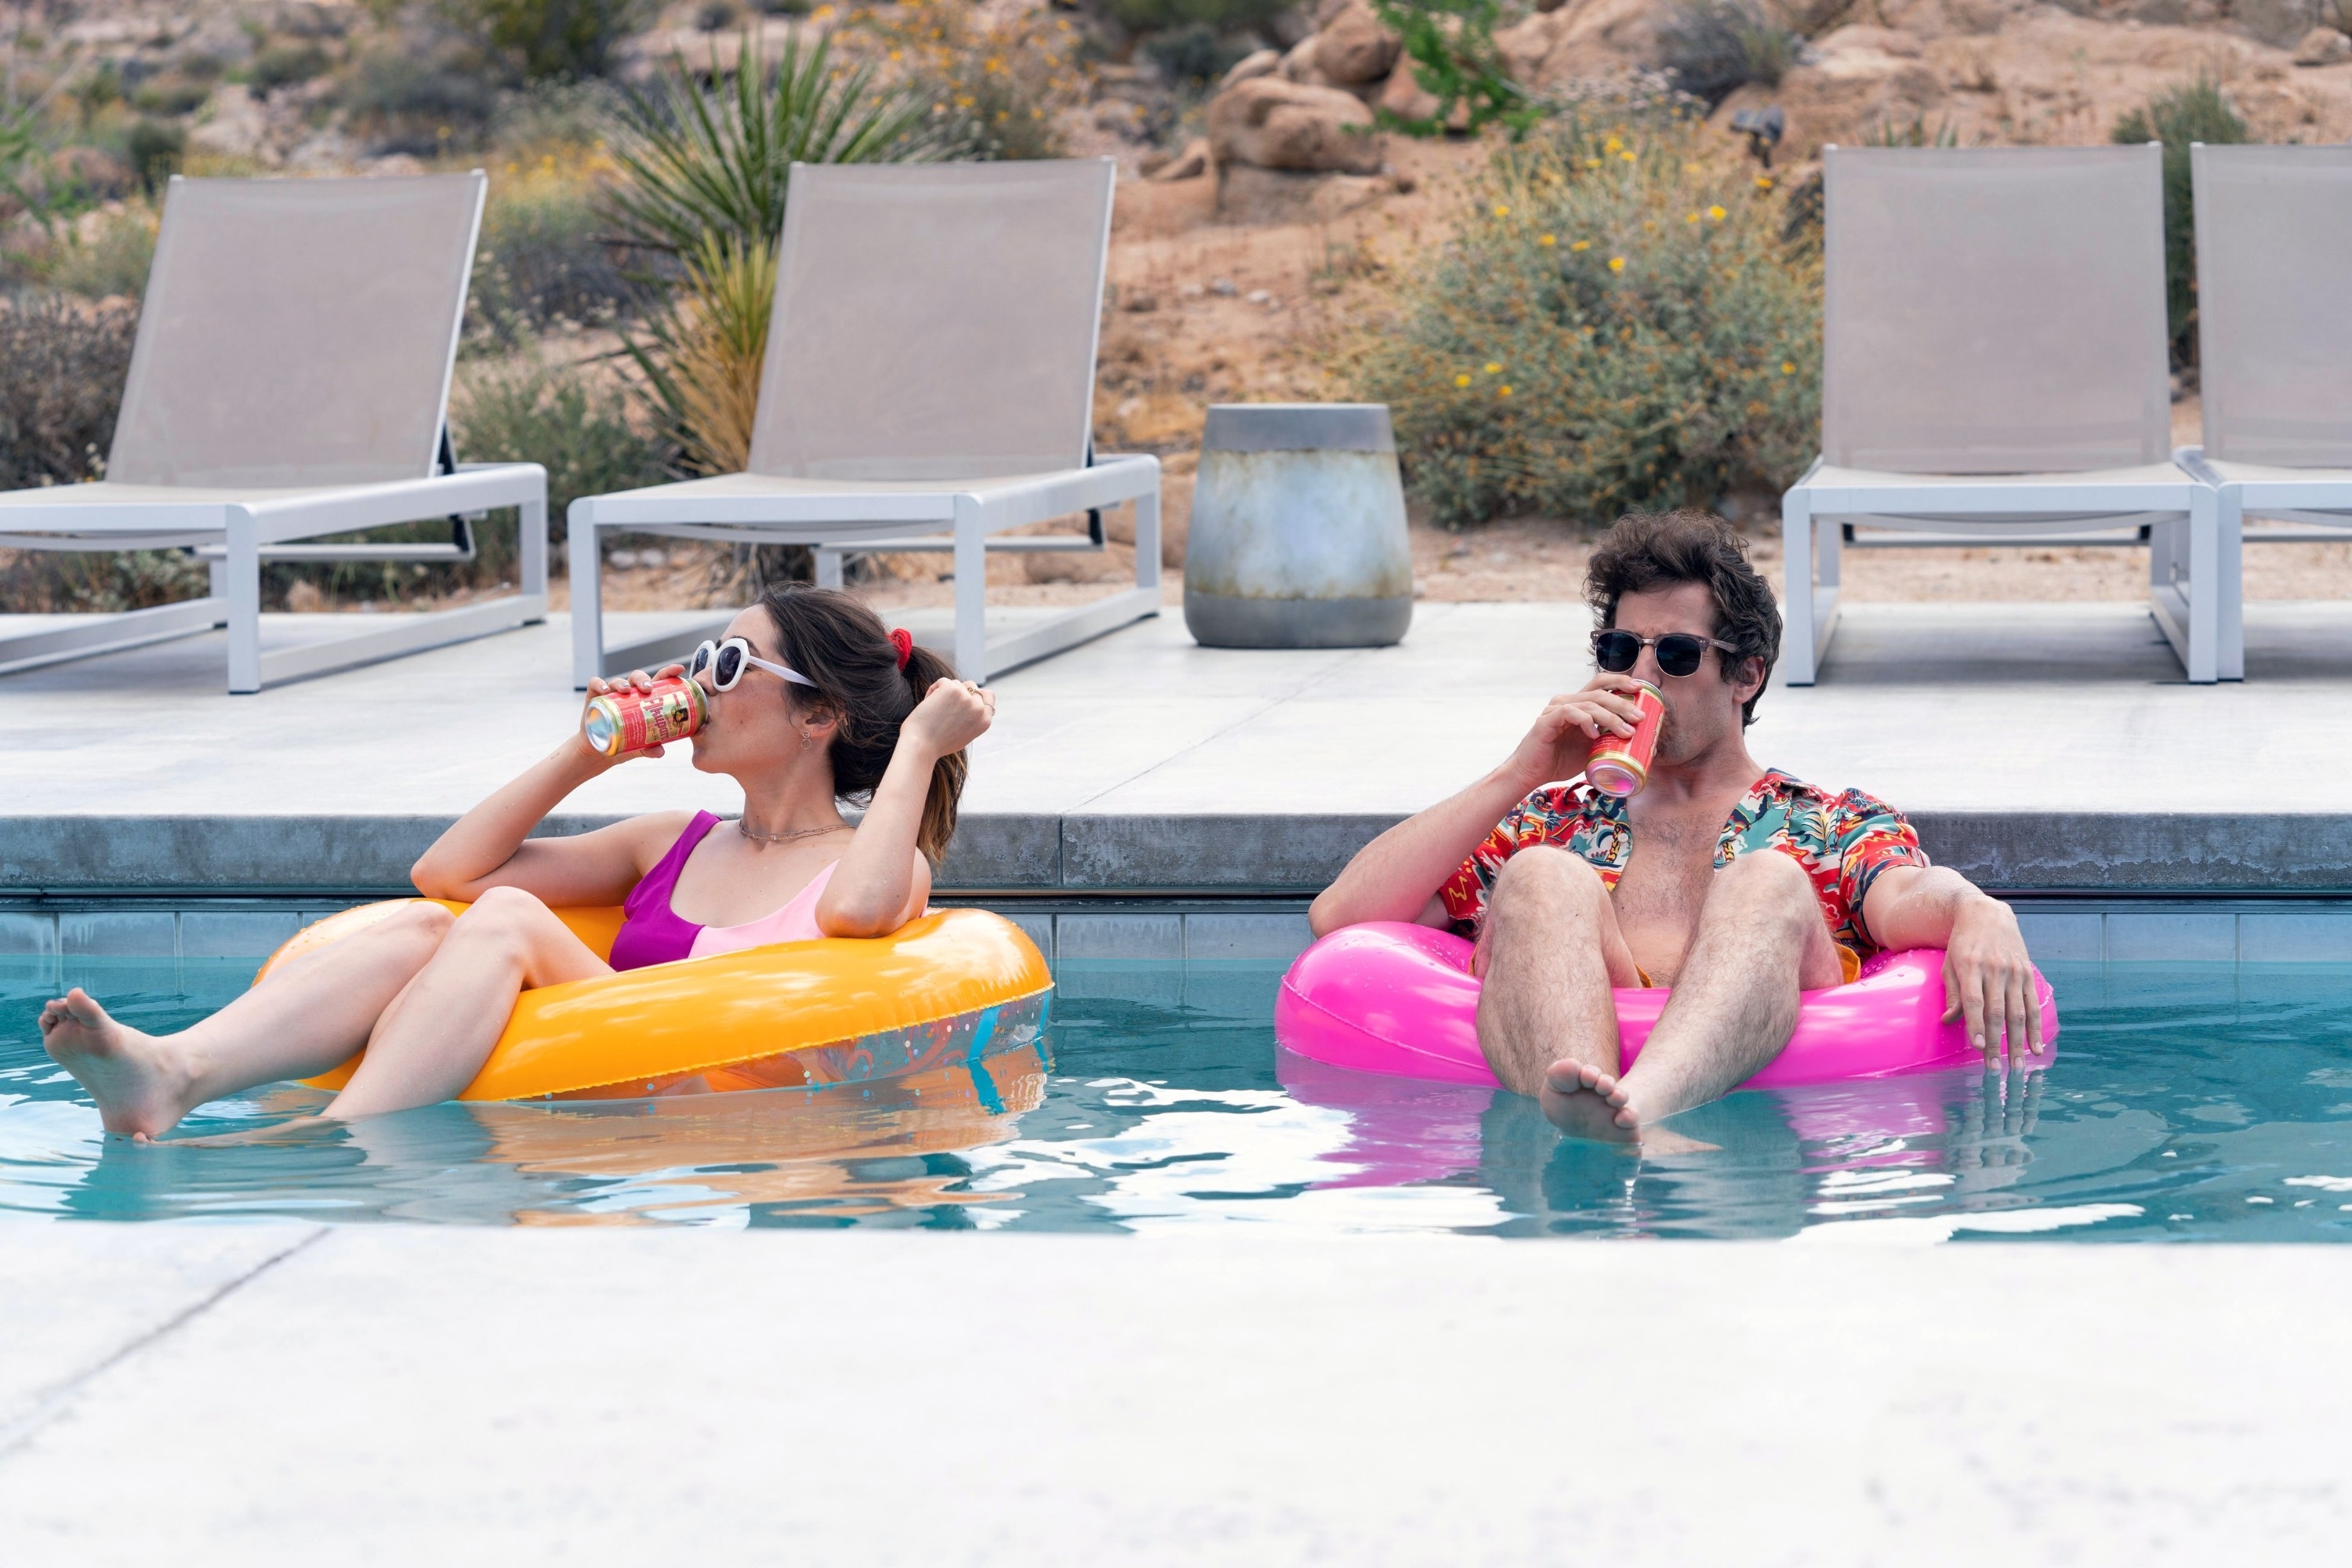 Two people relaxing on pool floats, sipping drinks, in a pool by lounge chairs